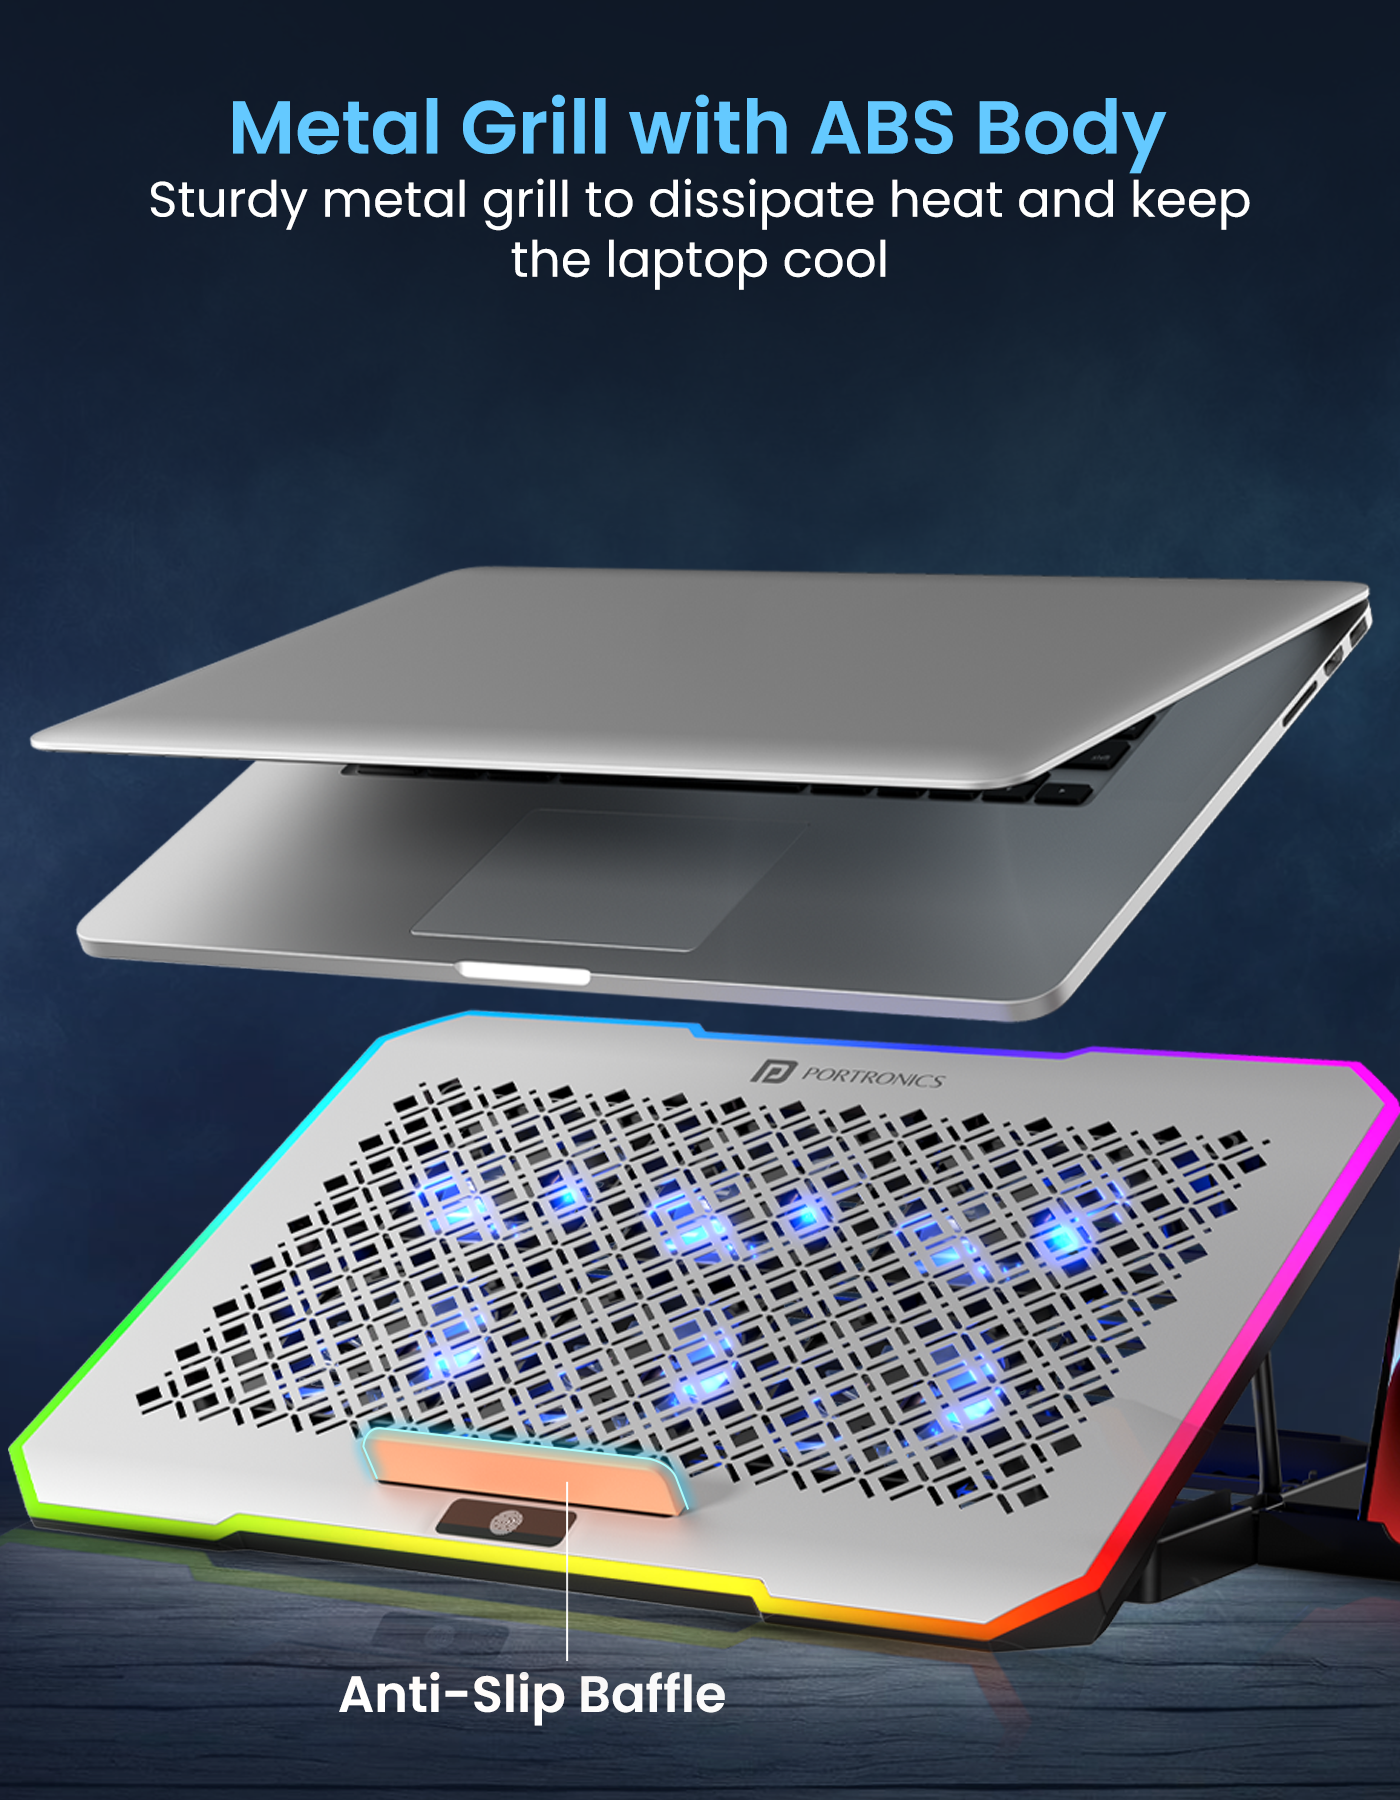 Portronics My Buddy Air Pro Laptop Cooling stand with fan has metal grill with abs body to keep your laptop cool